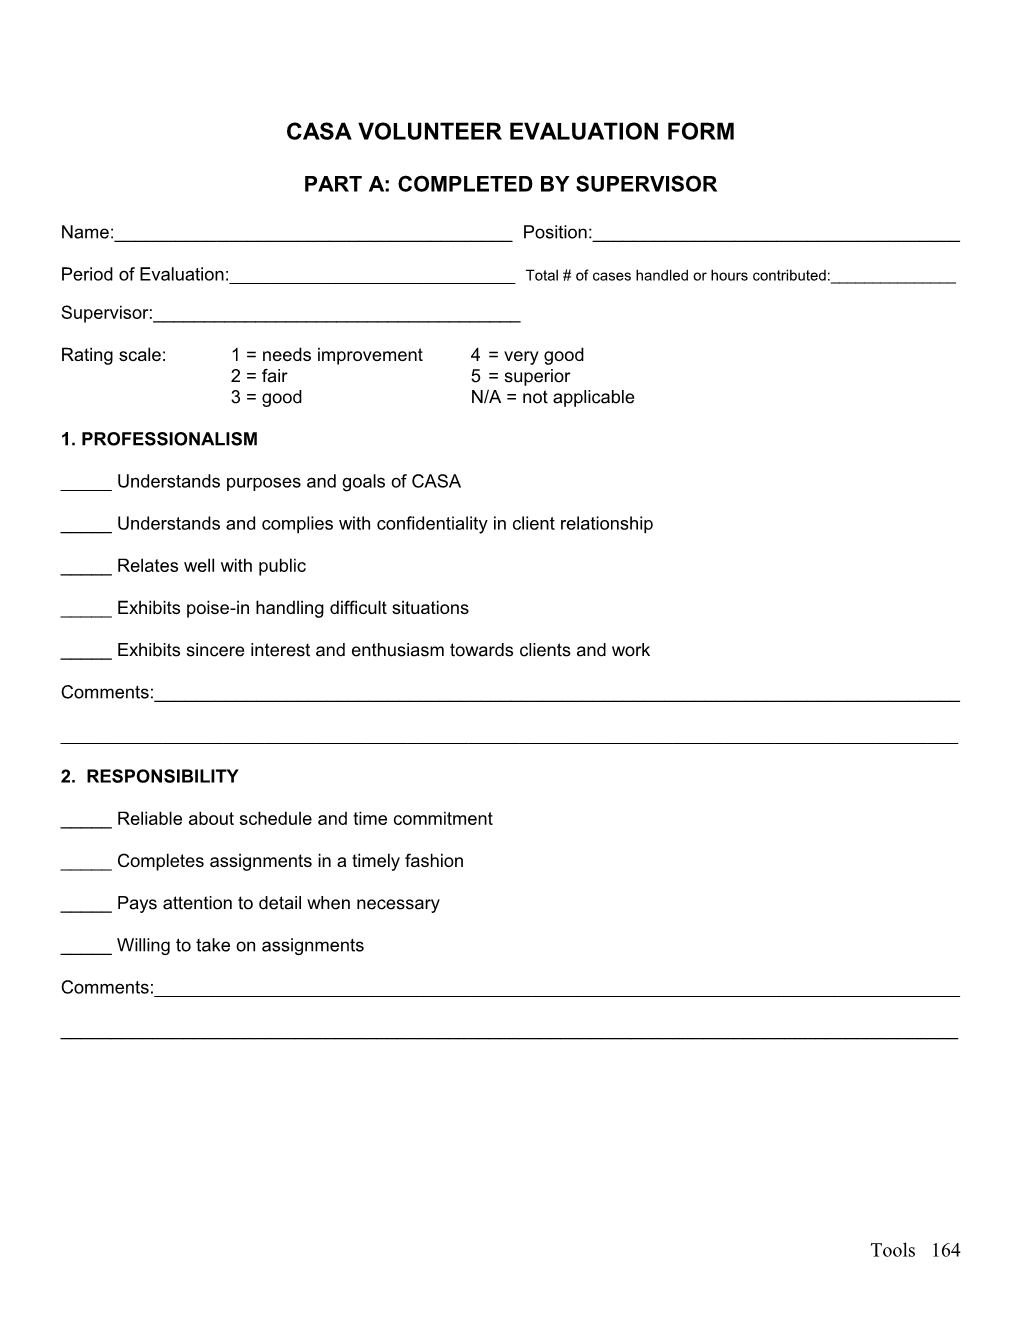 Sample Volunteer Evaluation Form (Parts a and B)